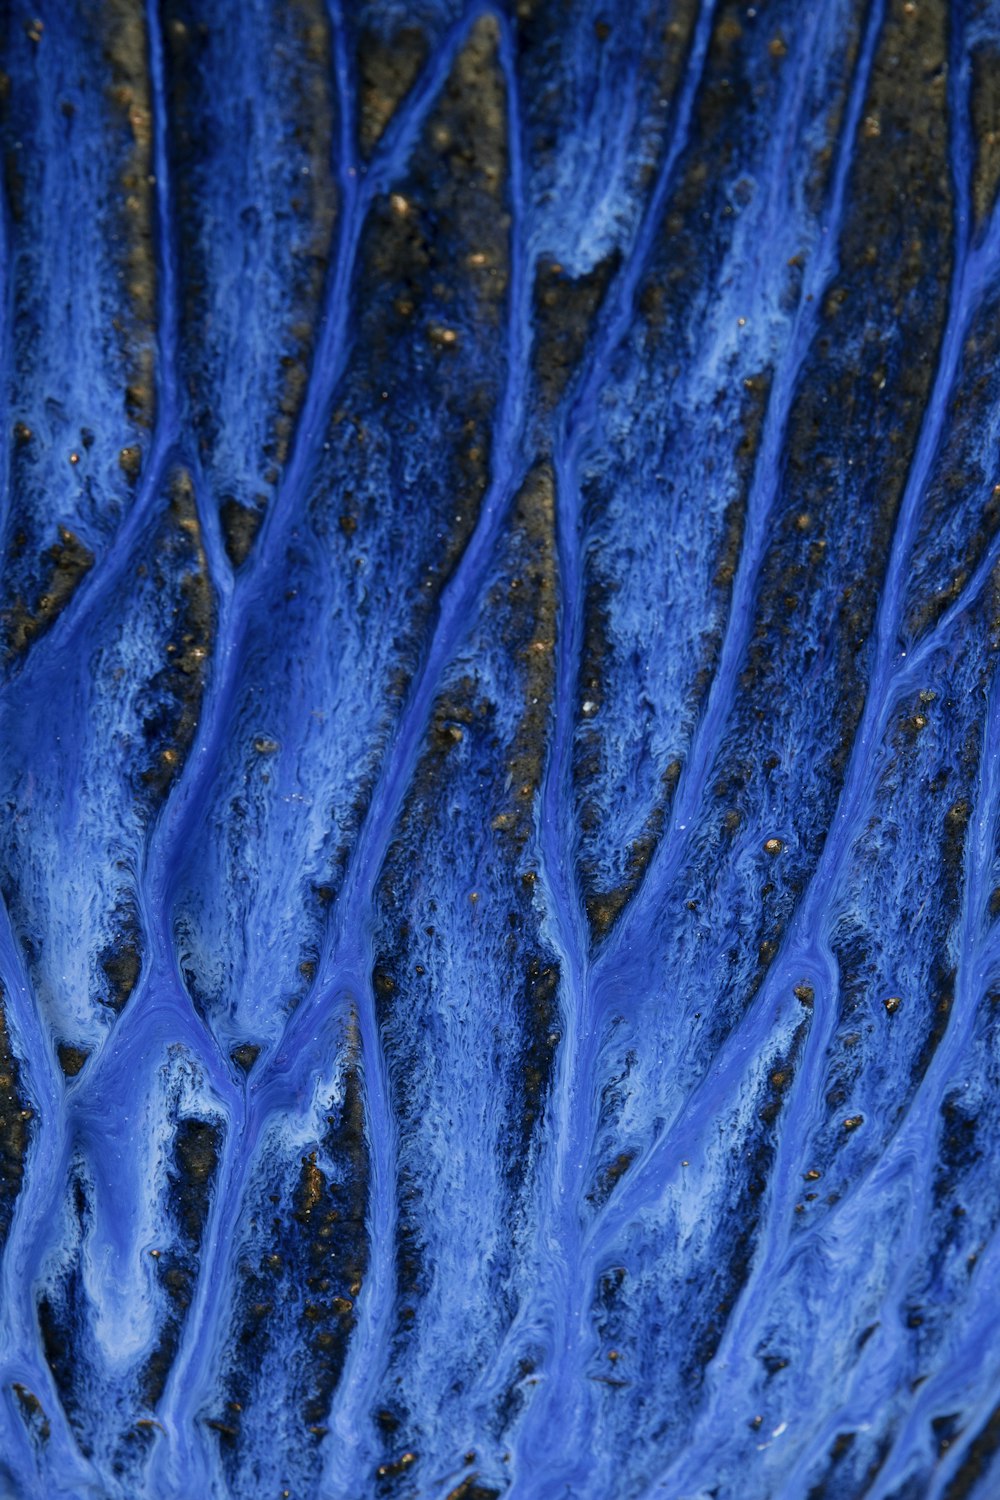 a close up of a blue substance on a surface